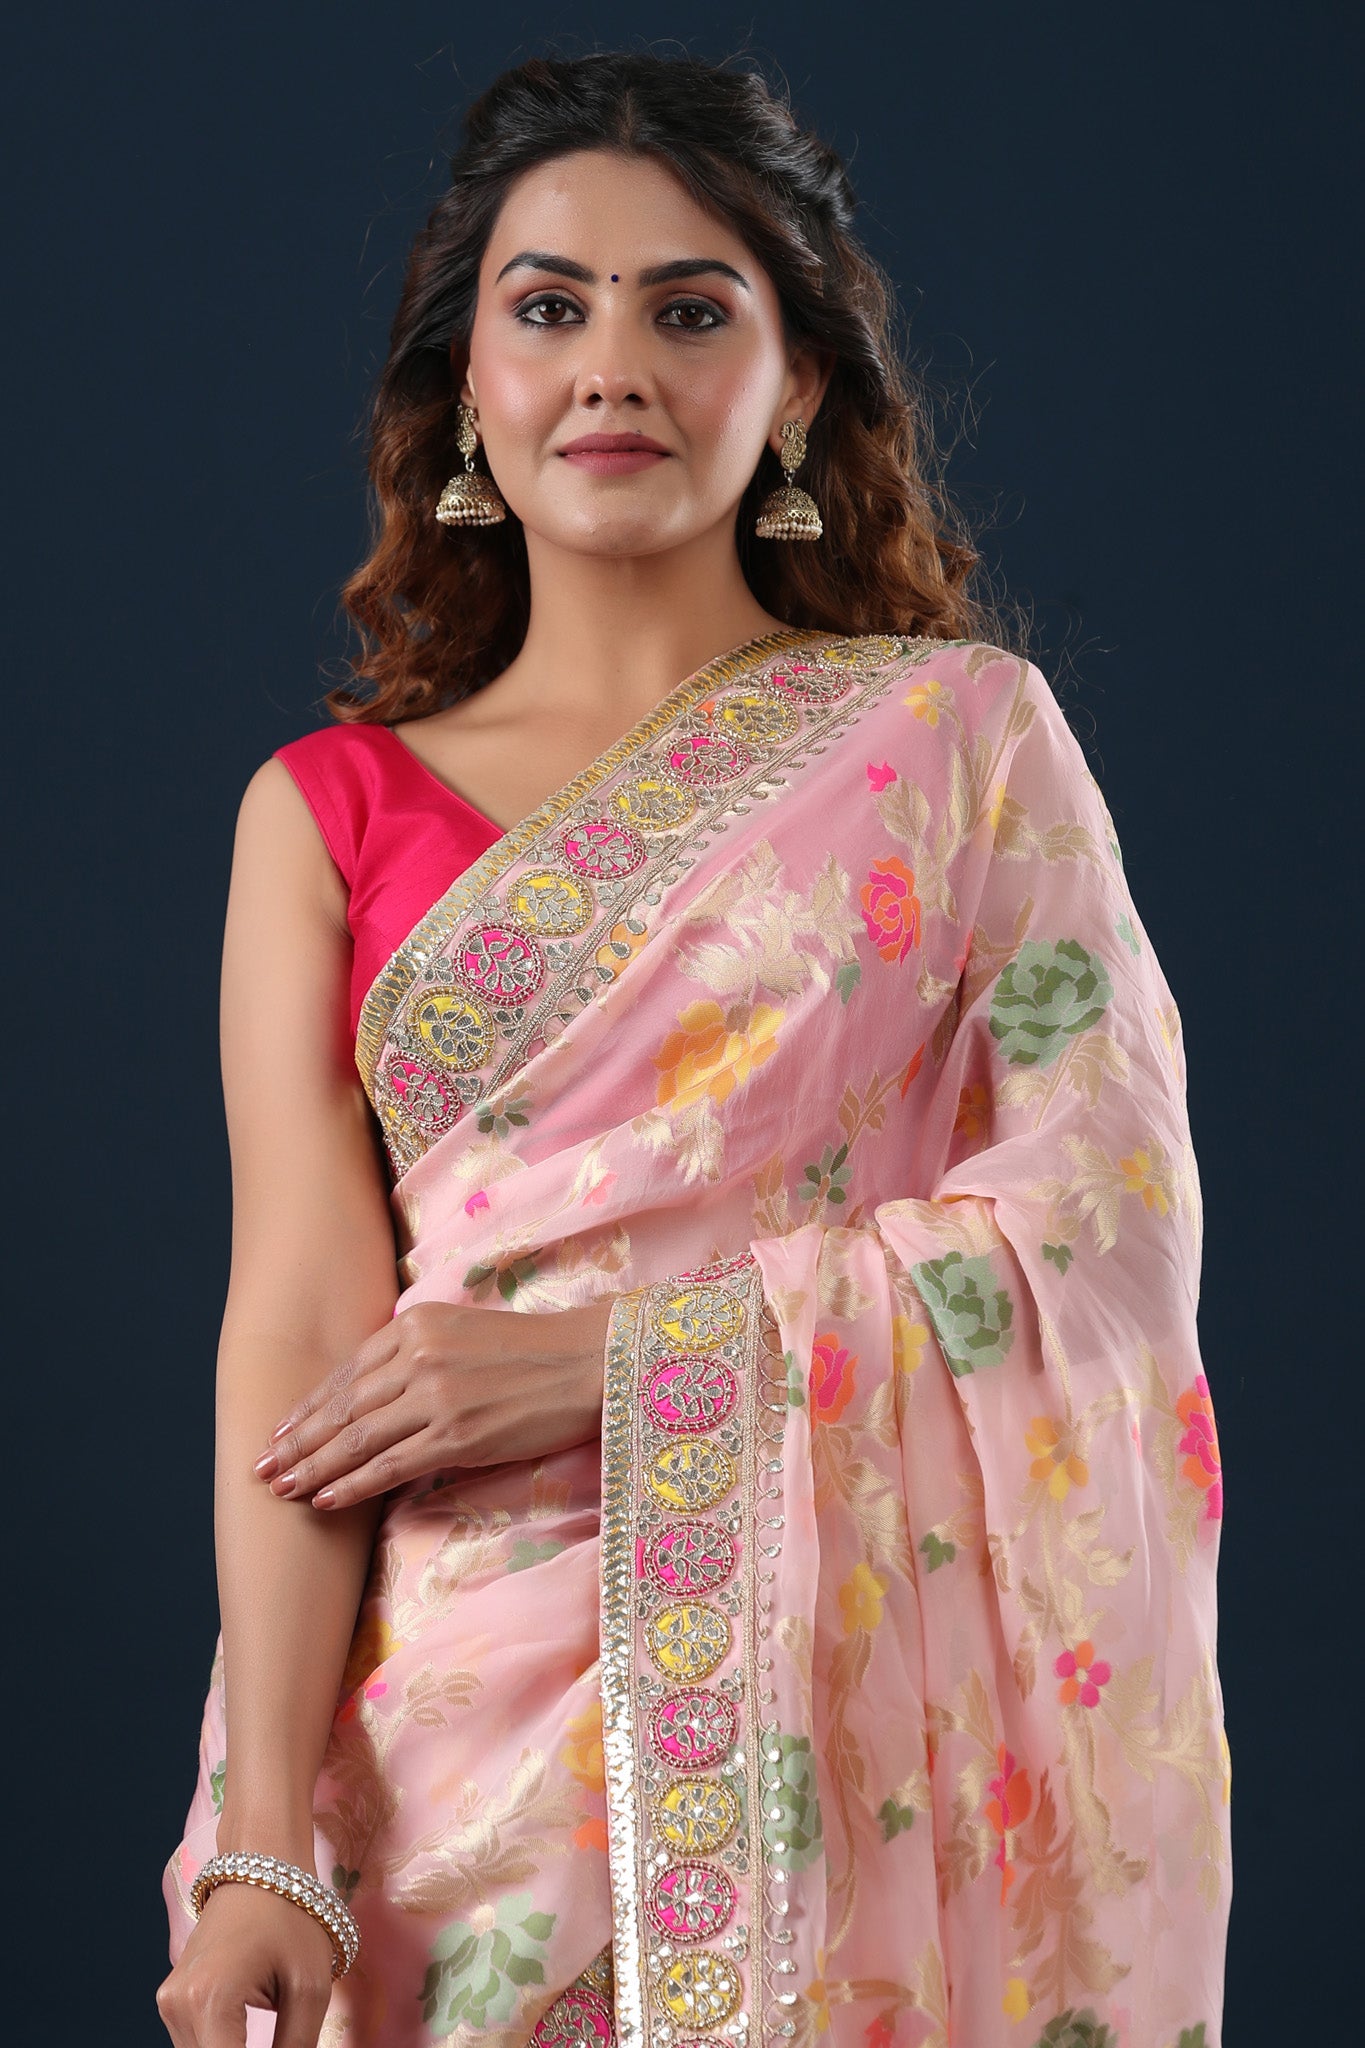 Pink Rose Flower Print Organza Saree with Tafetta Blouse - Ships in 3-4  Weeks / Unstitched / With Polti Bag | Organza saree, Saree, Printed blouse  saree